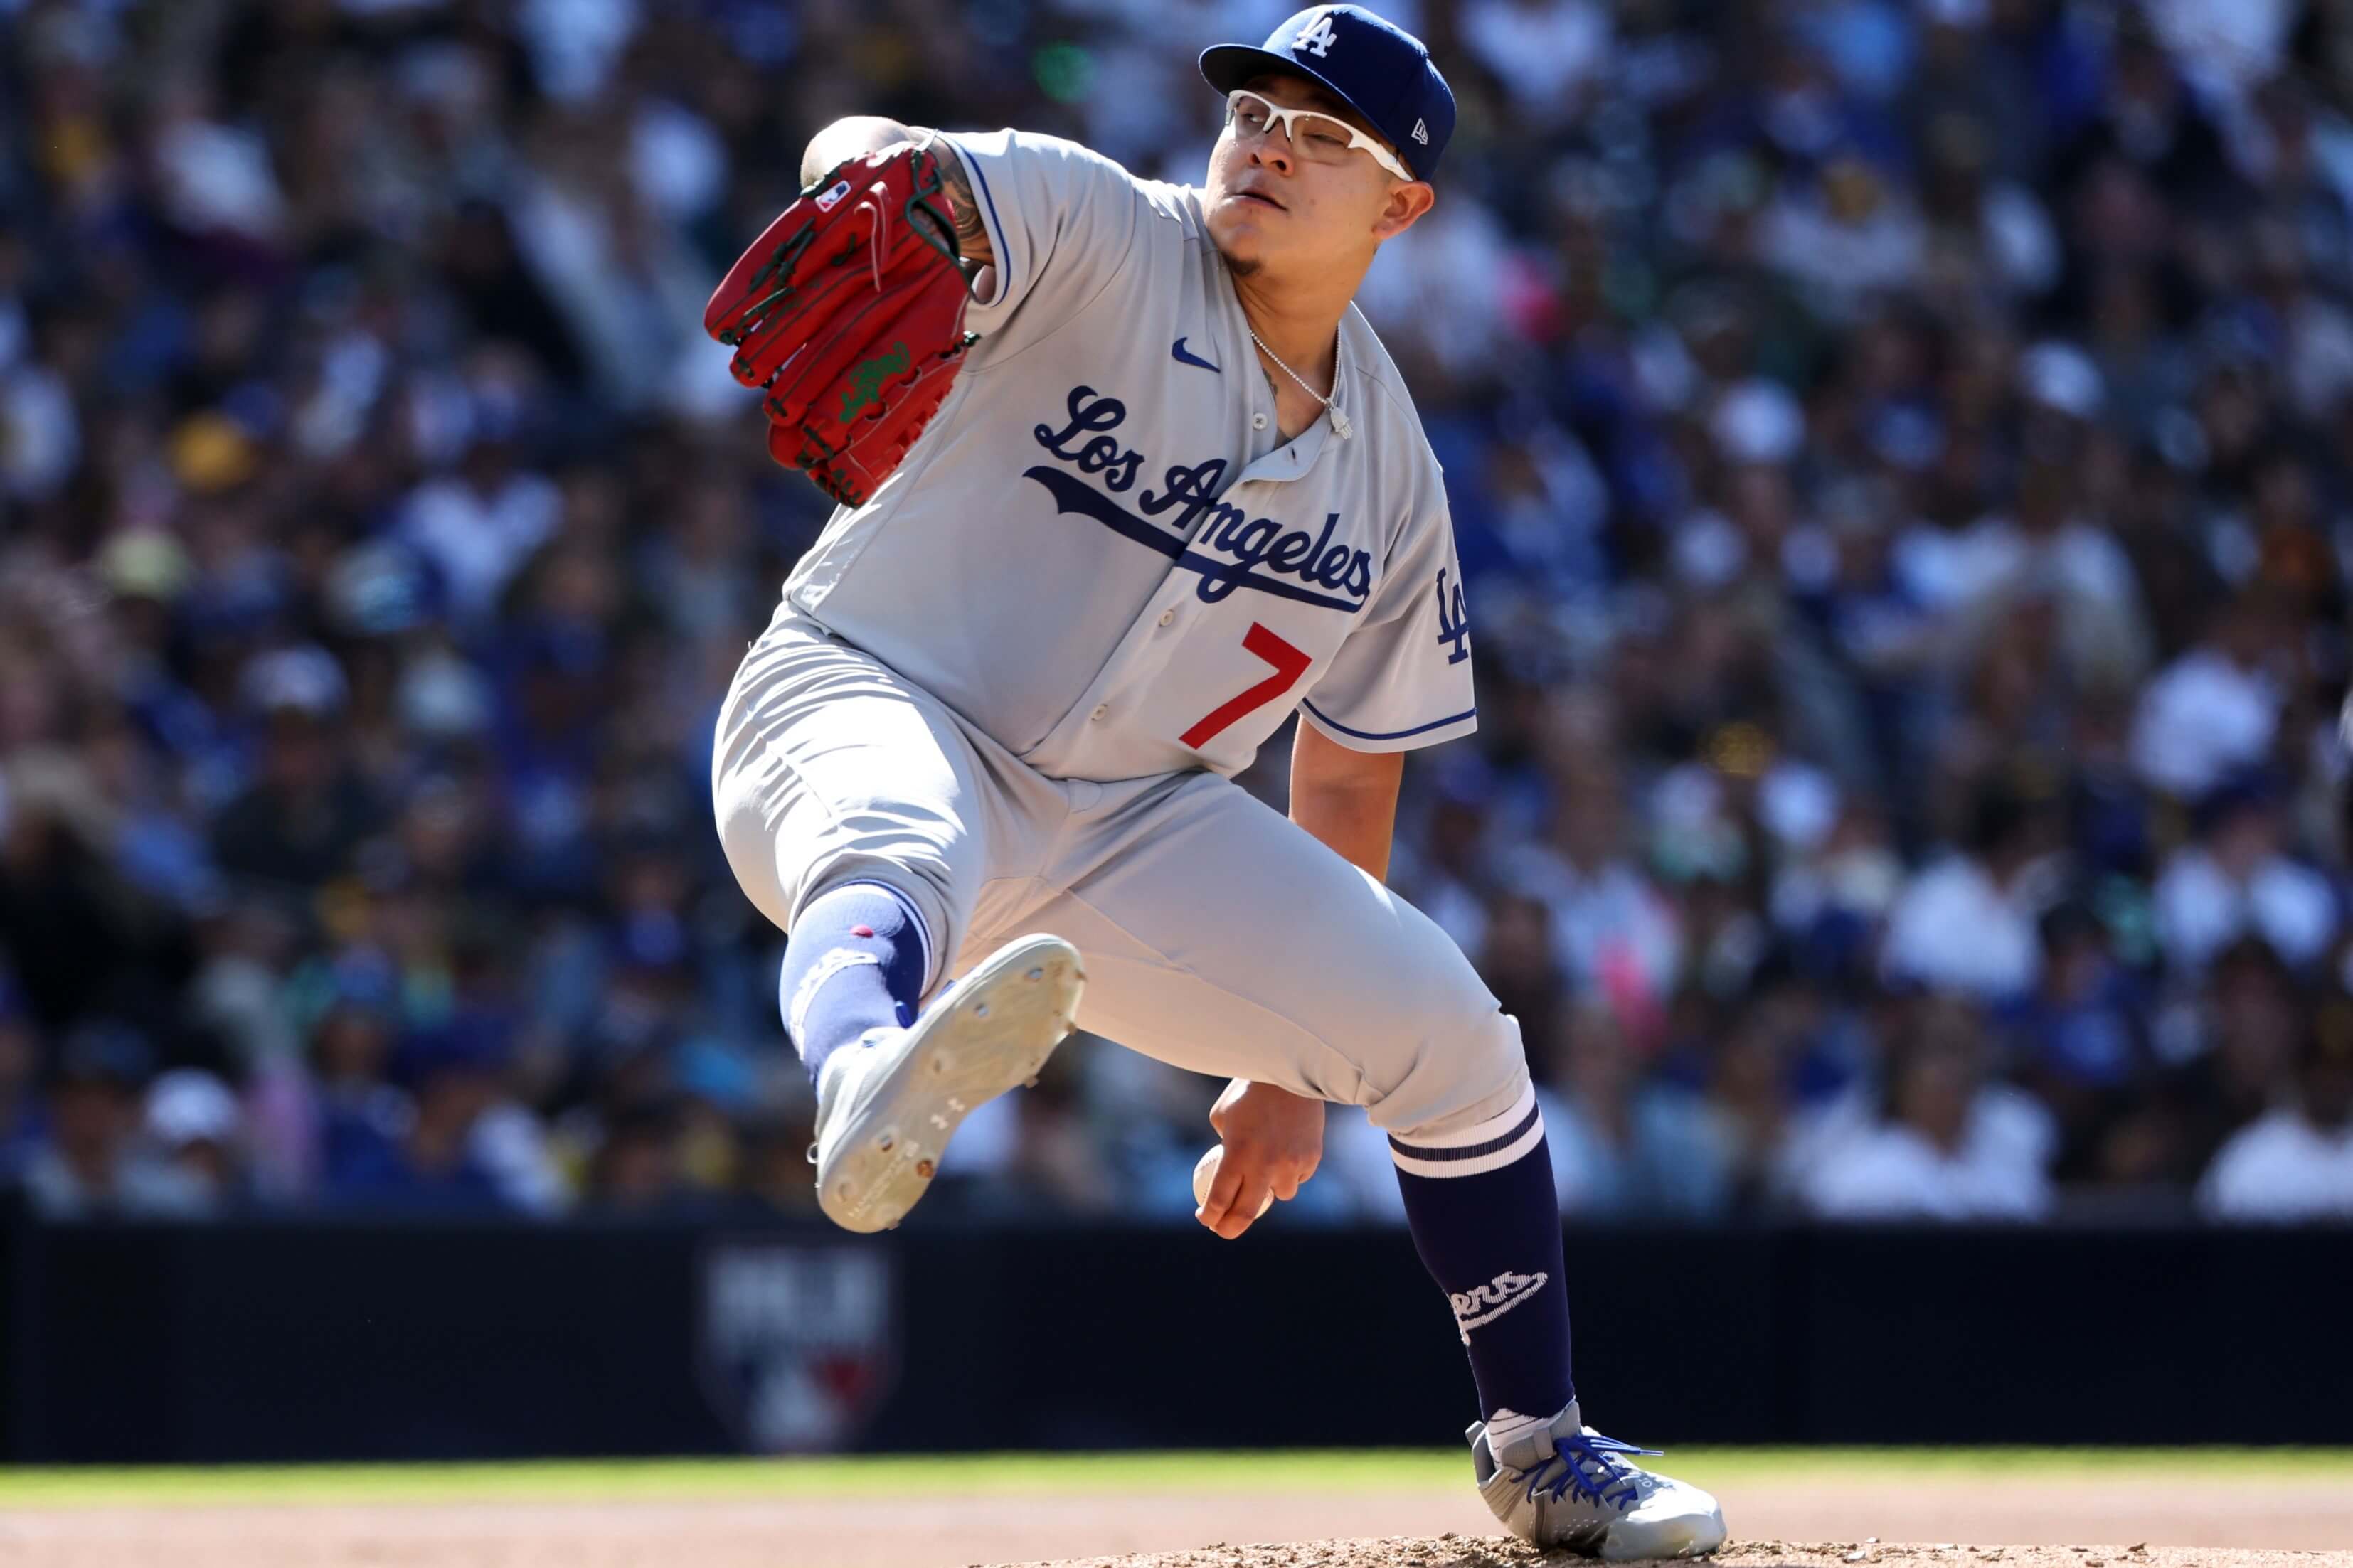 Is this the Dodgers' year? Our writers make their MLB picks - Los